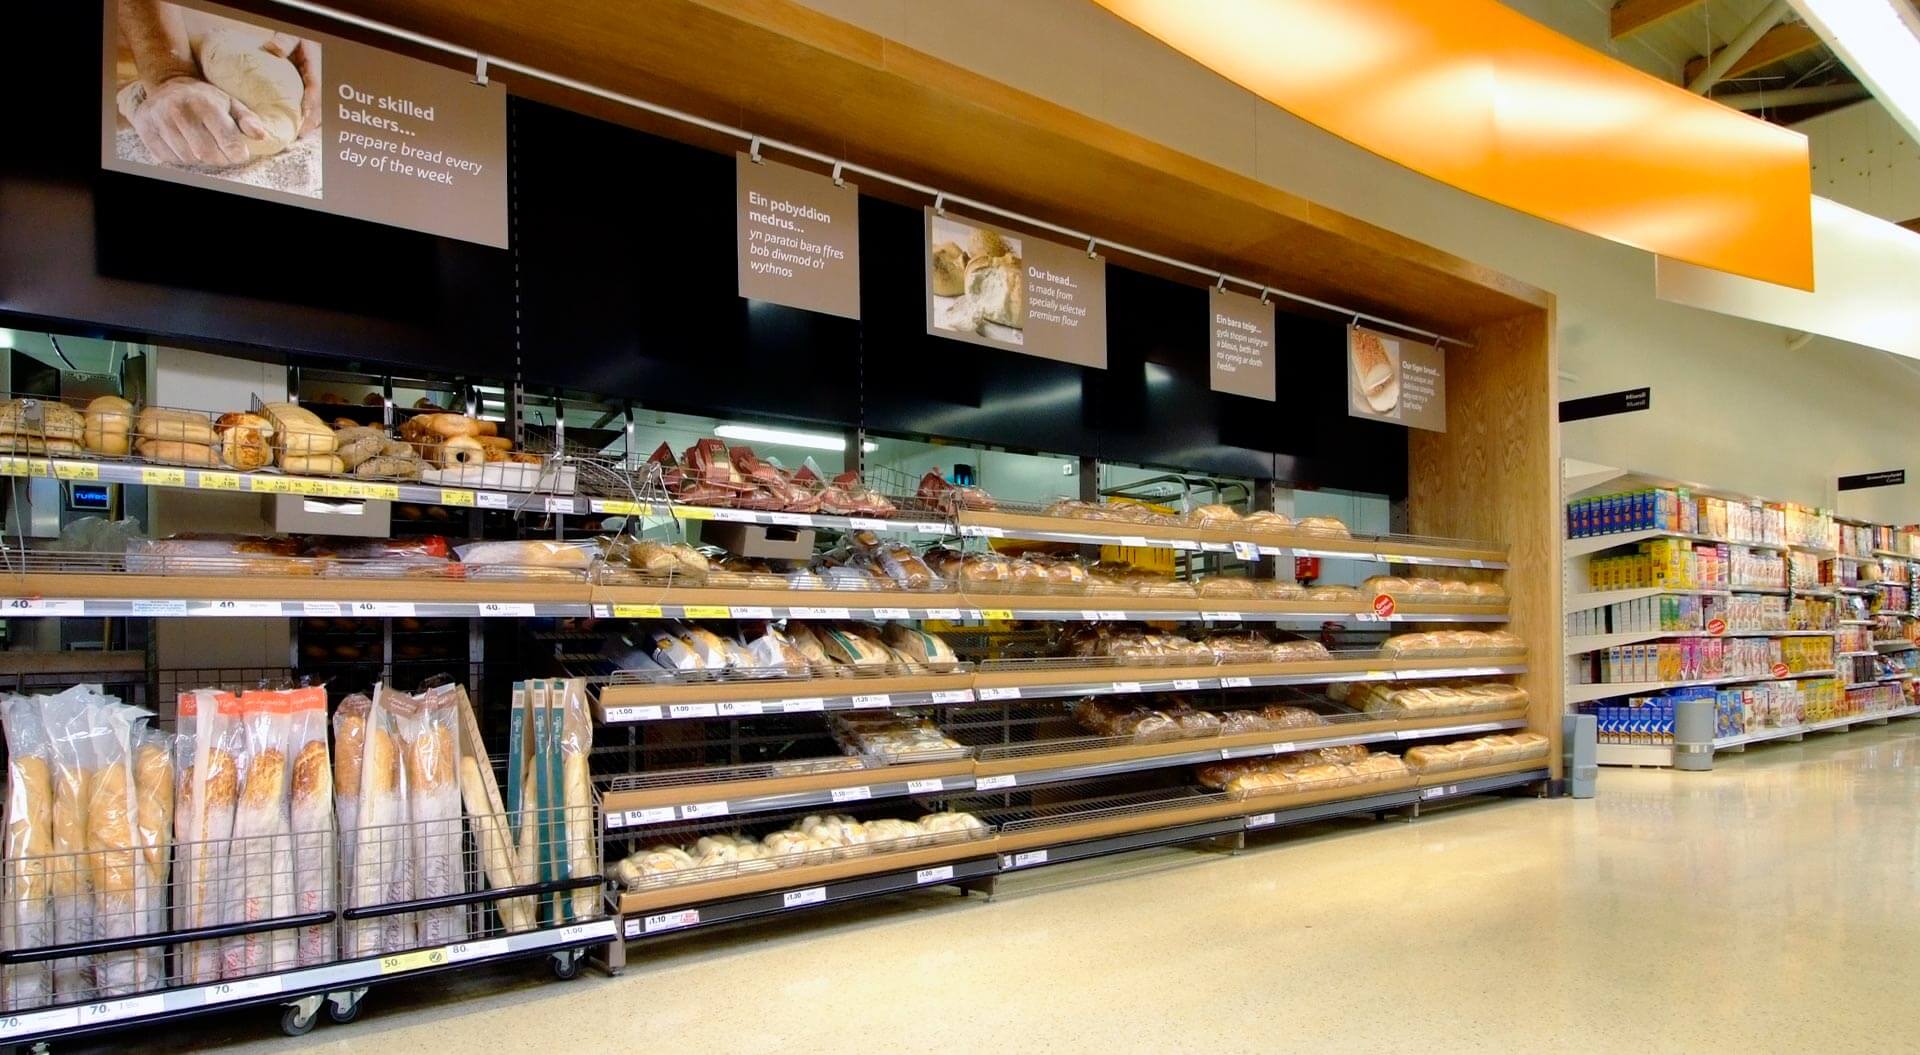 Tesco supermarket welshpool bakery merchandising system and graphic communication suite